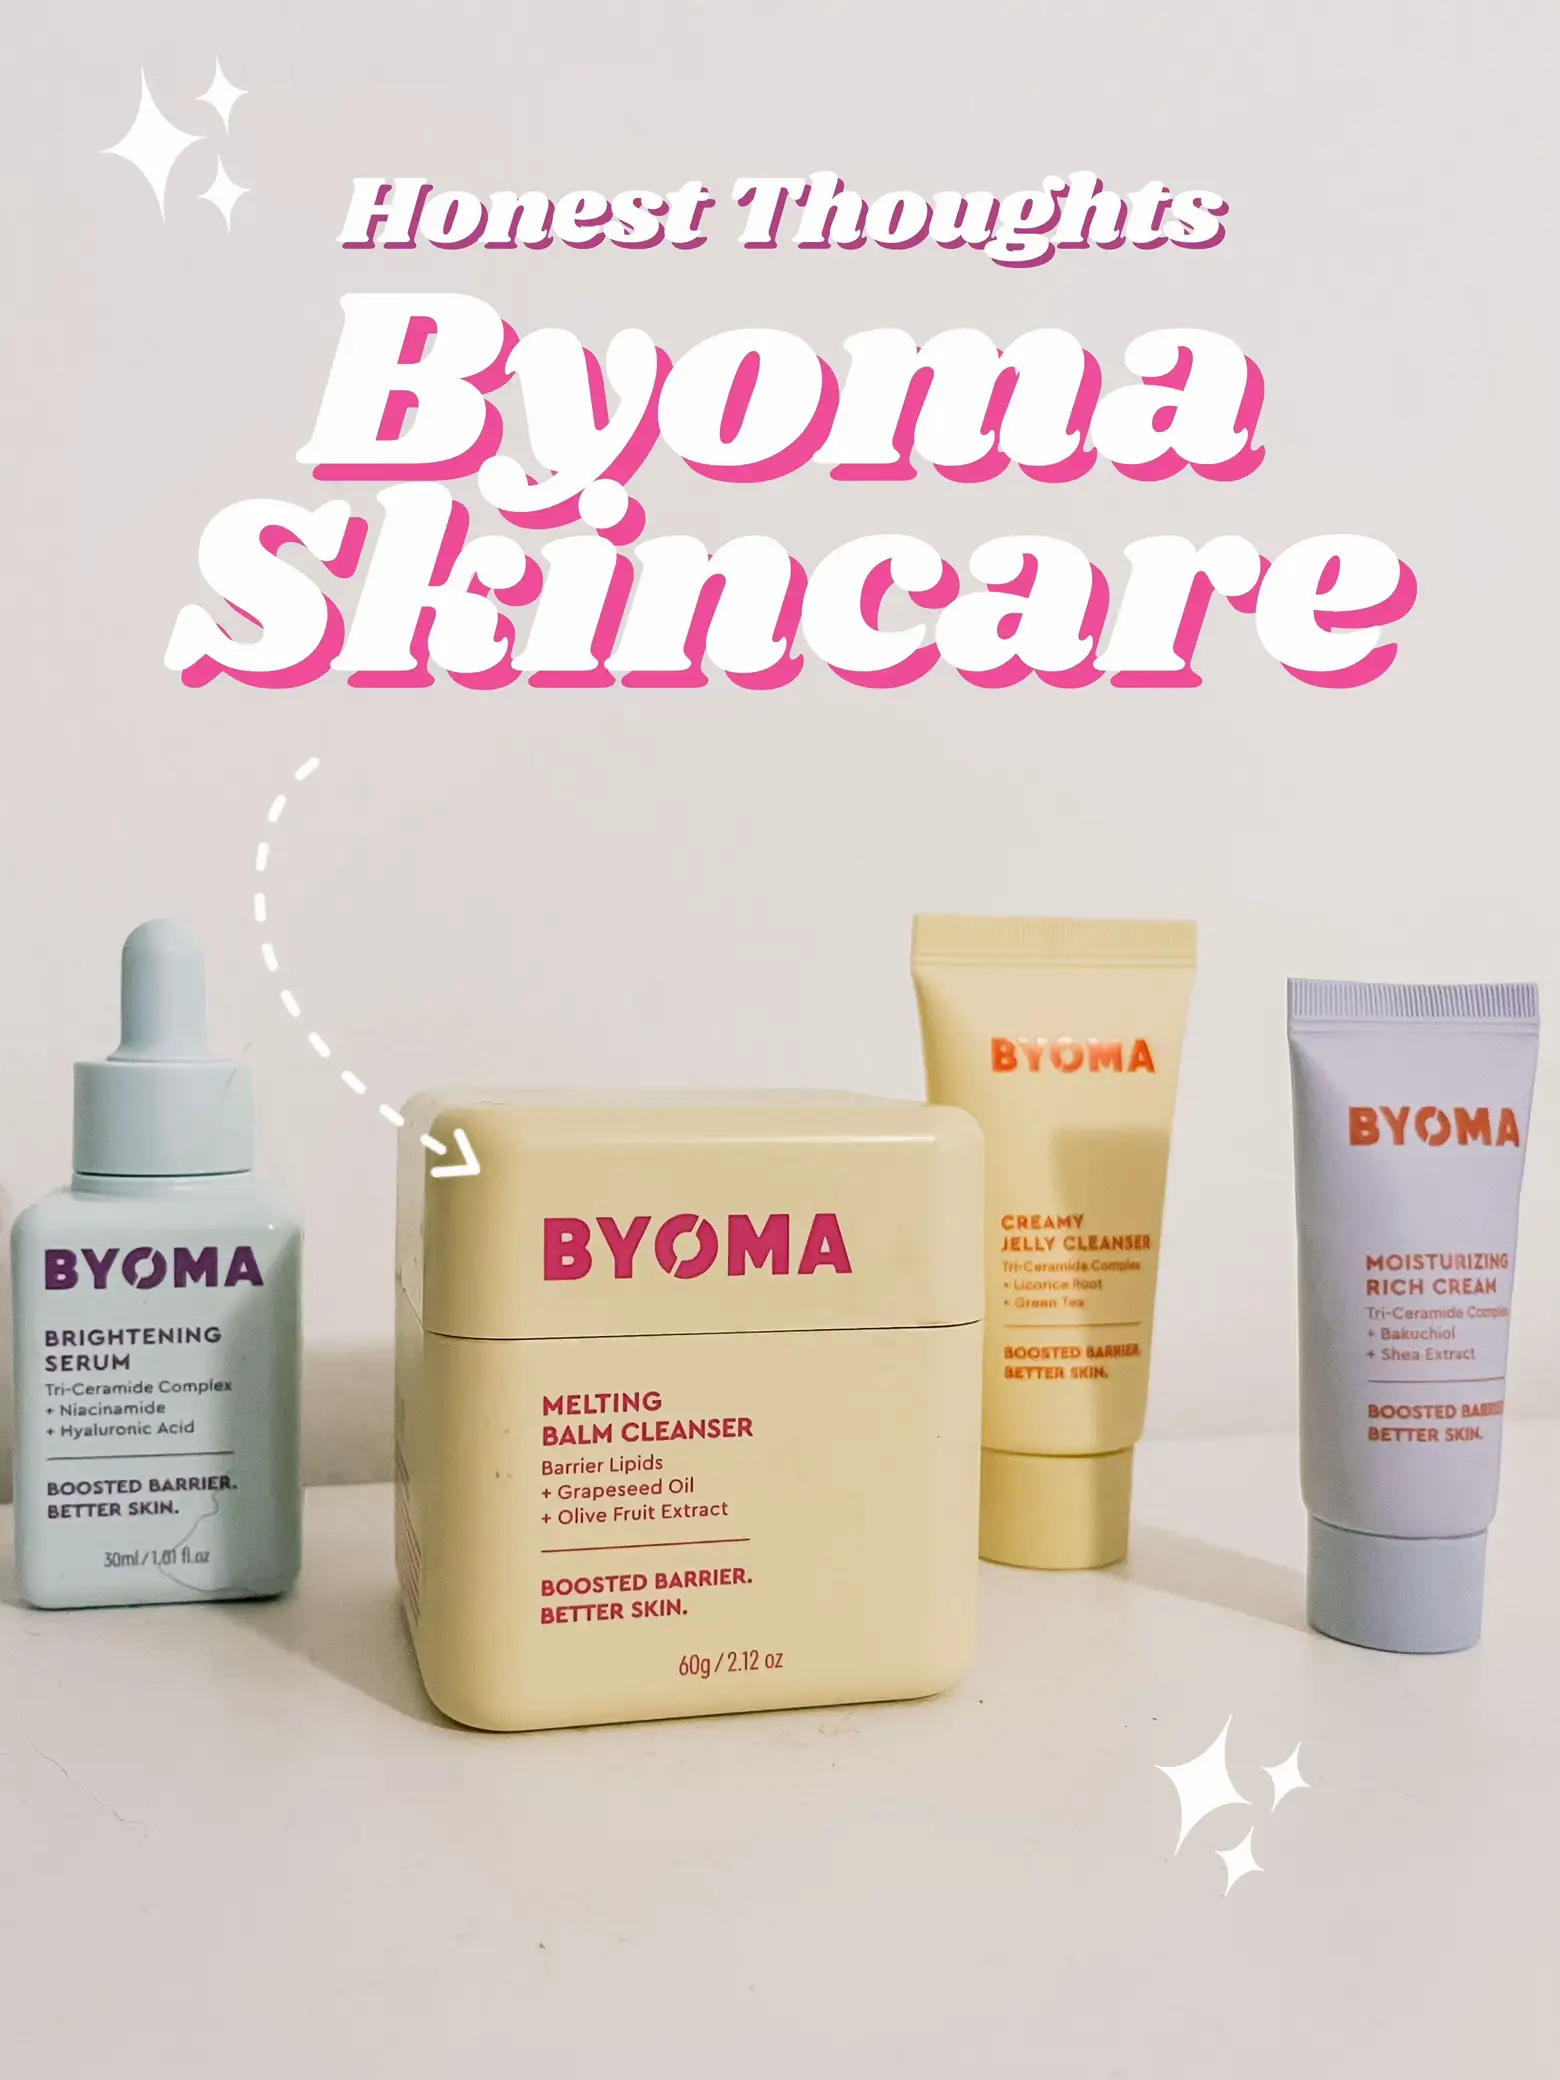 Byoma Skincare Review: My Honest Thoughts - A Beauty Edit